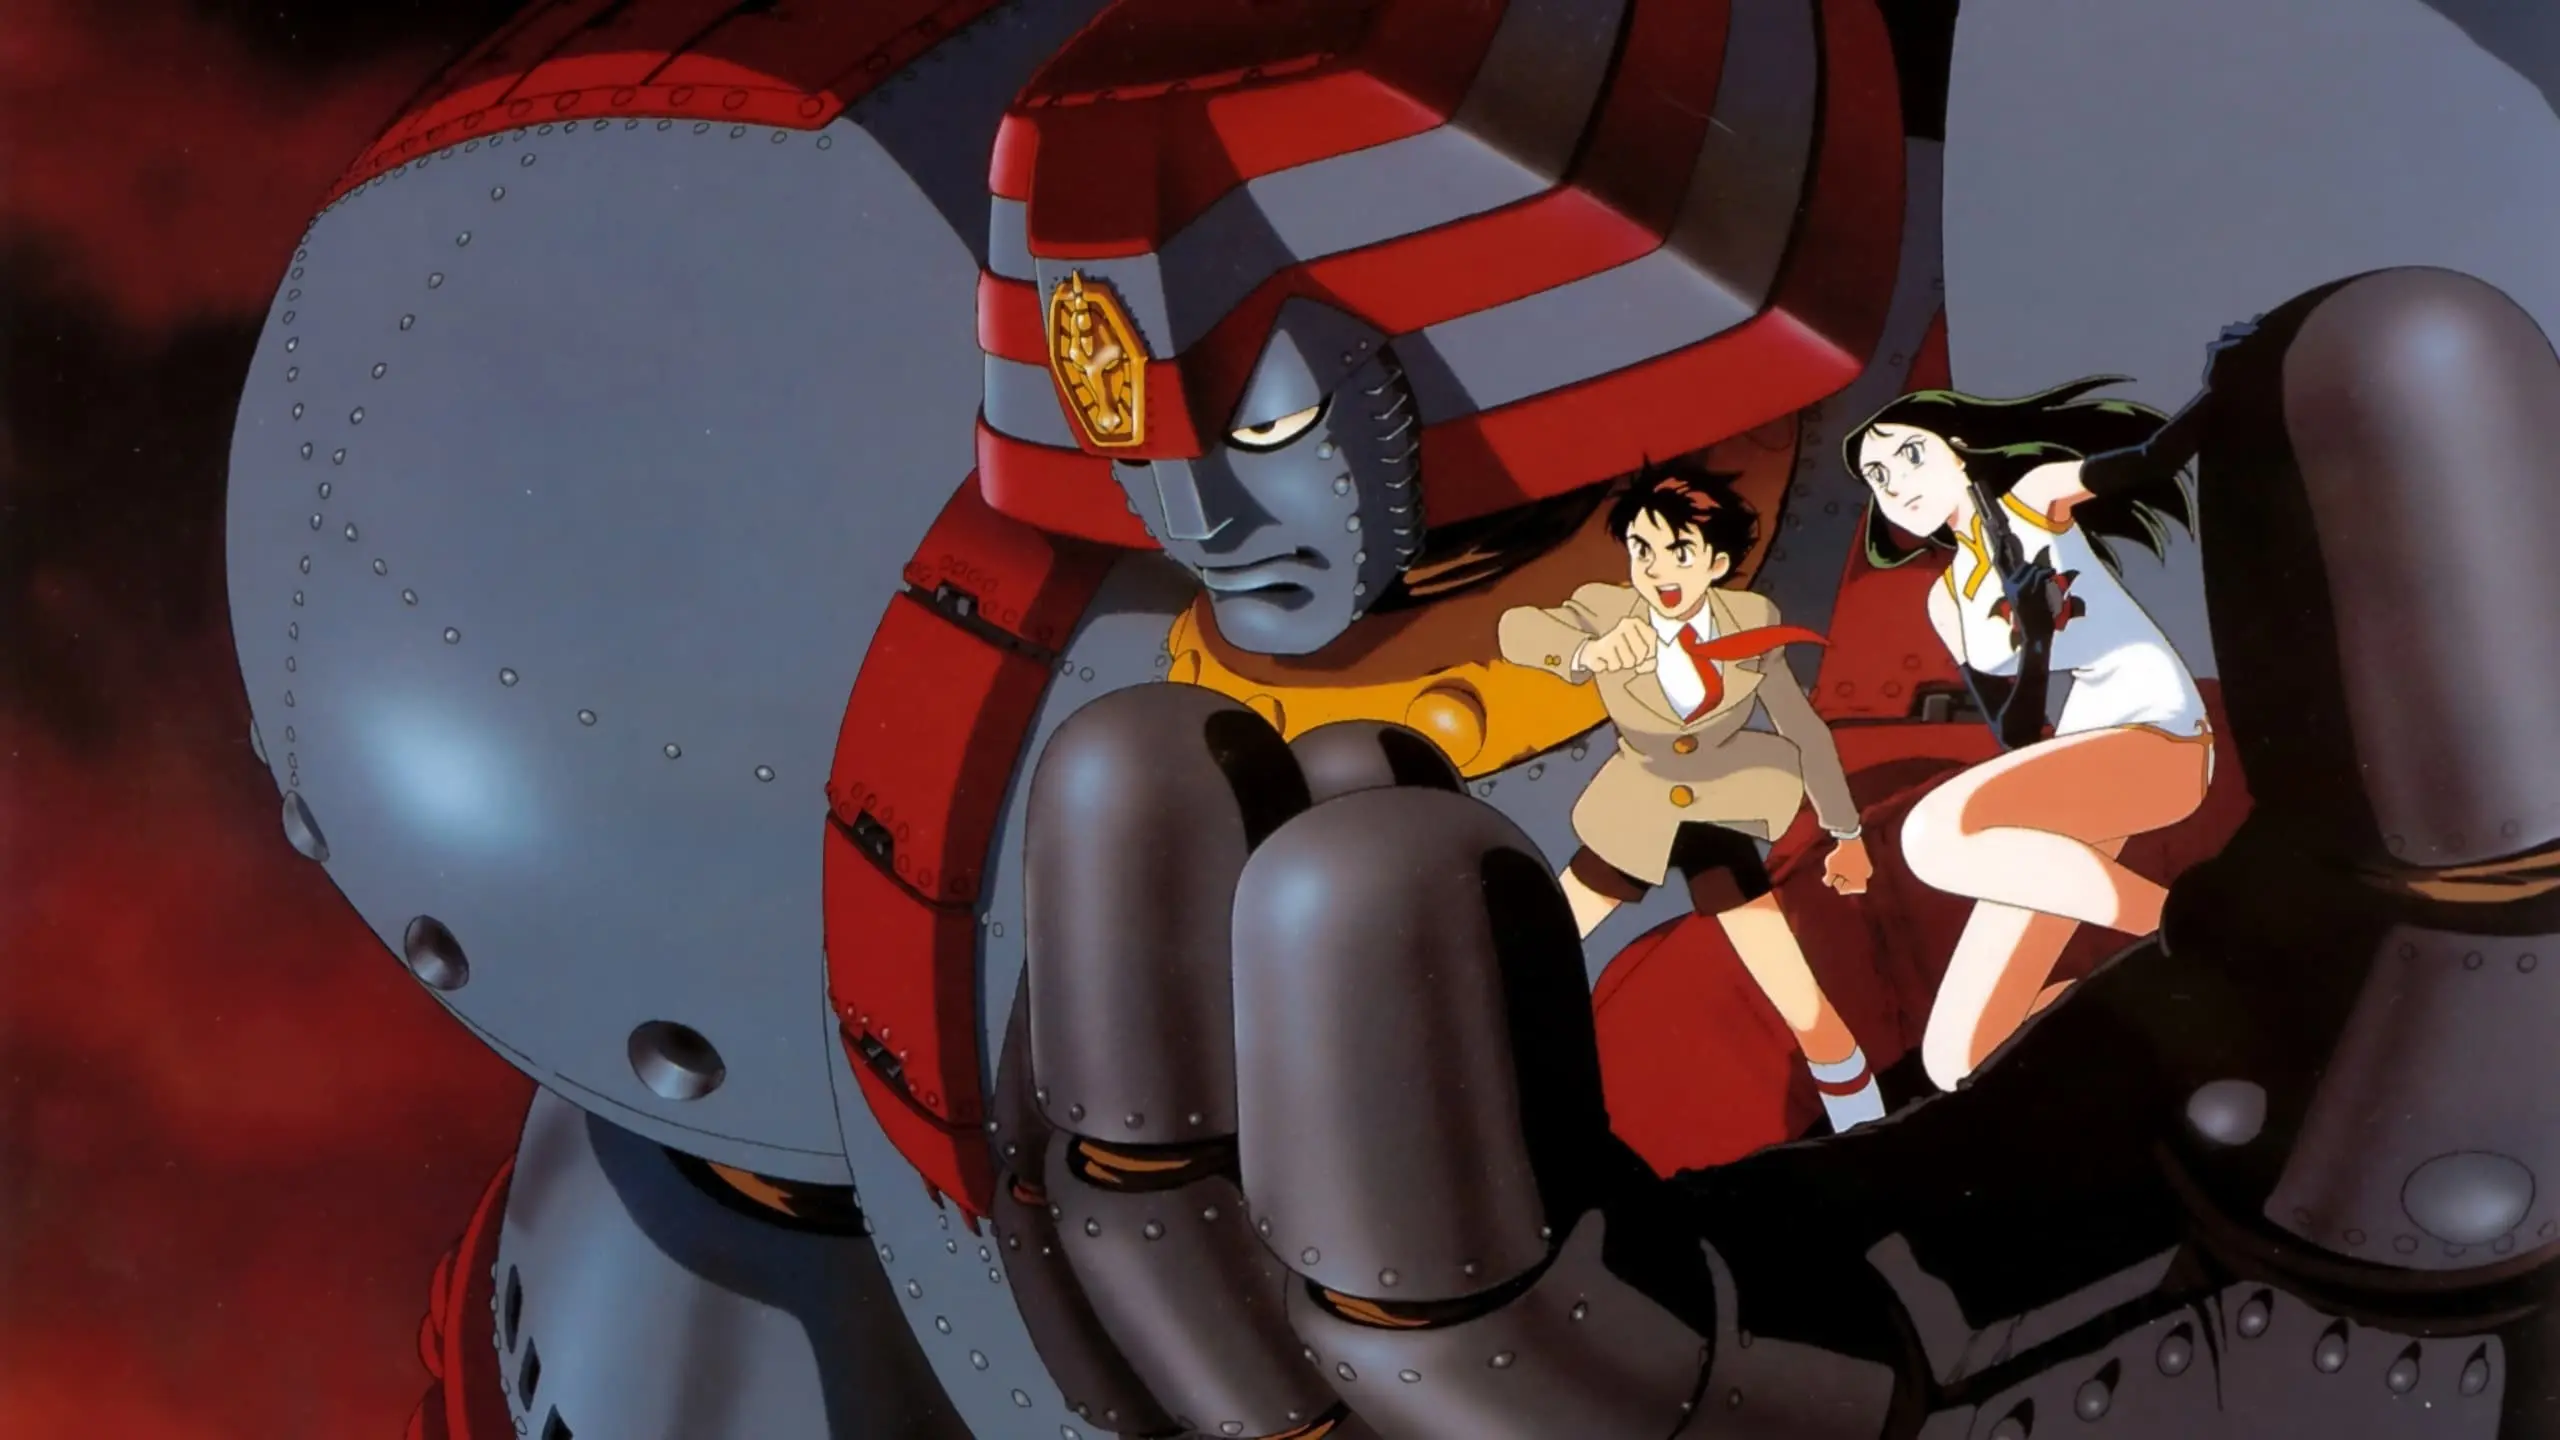 Giant Robo - The Day the Earth Stood Still